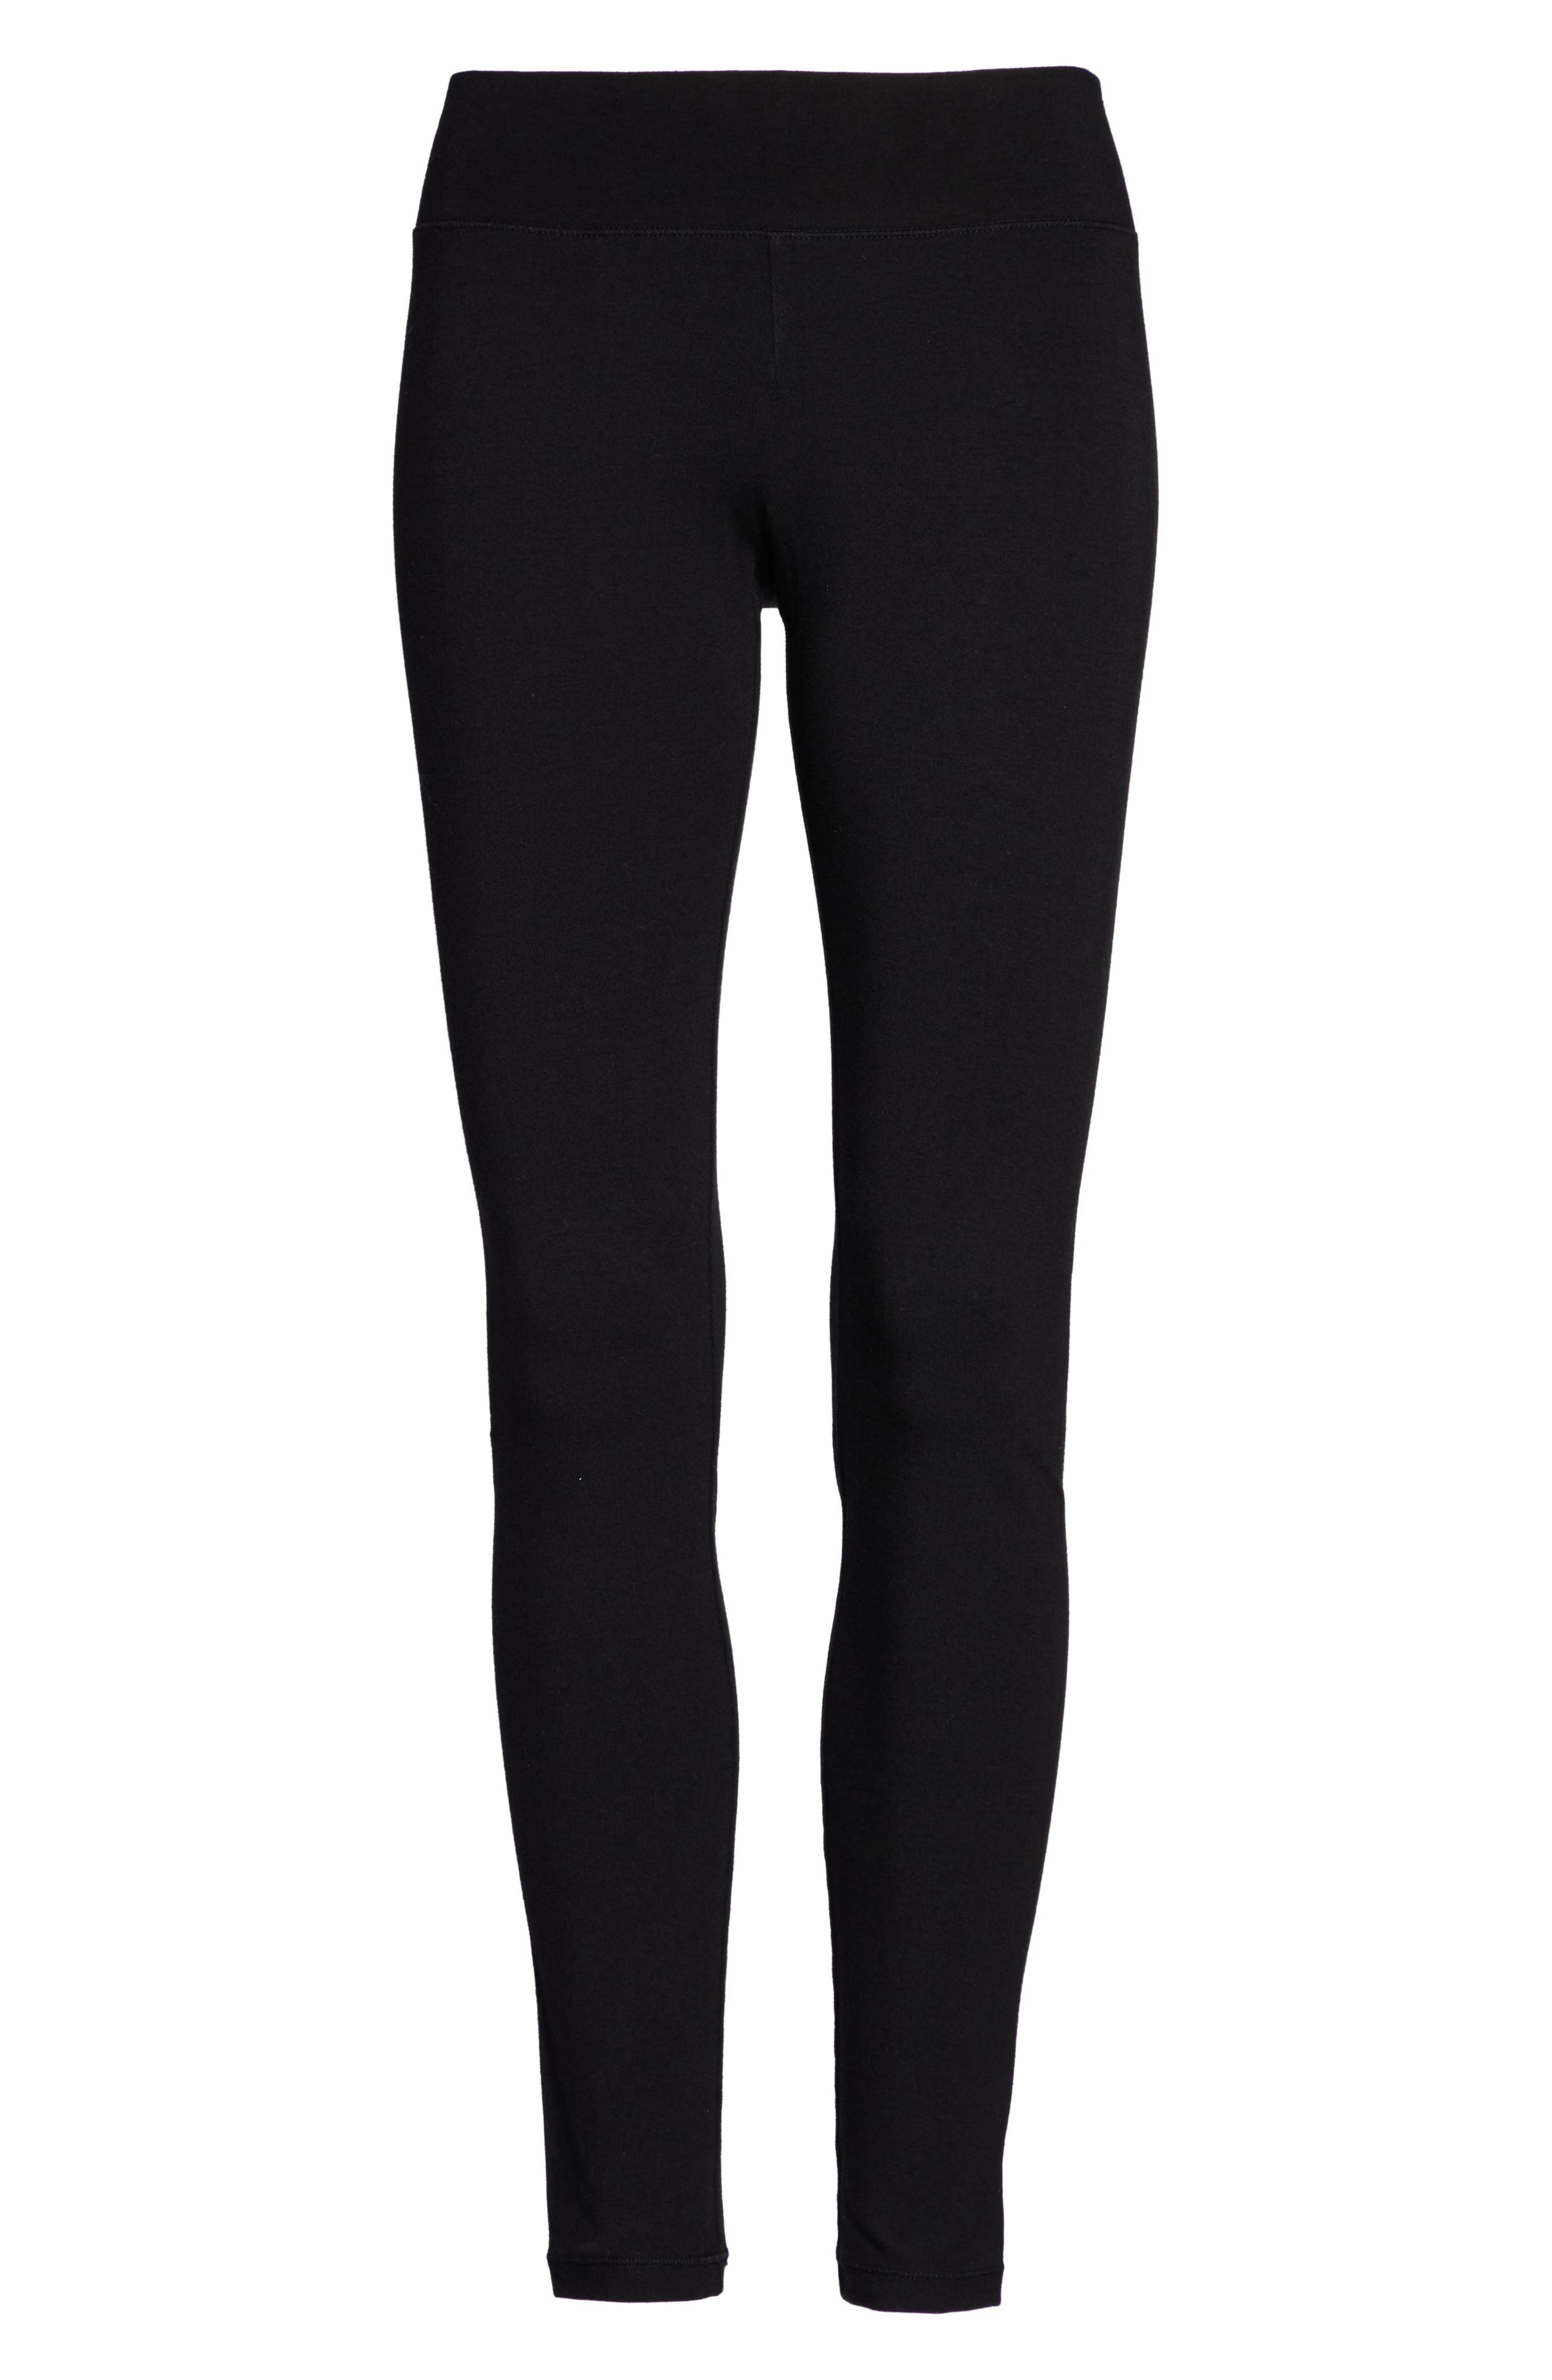 Women's HUE Black Ultra Leggings With Wide Waistband Size XL 